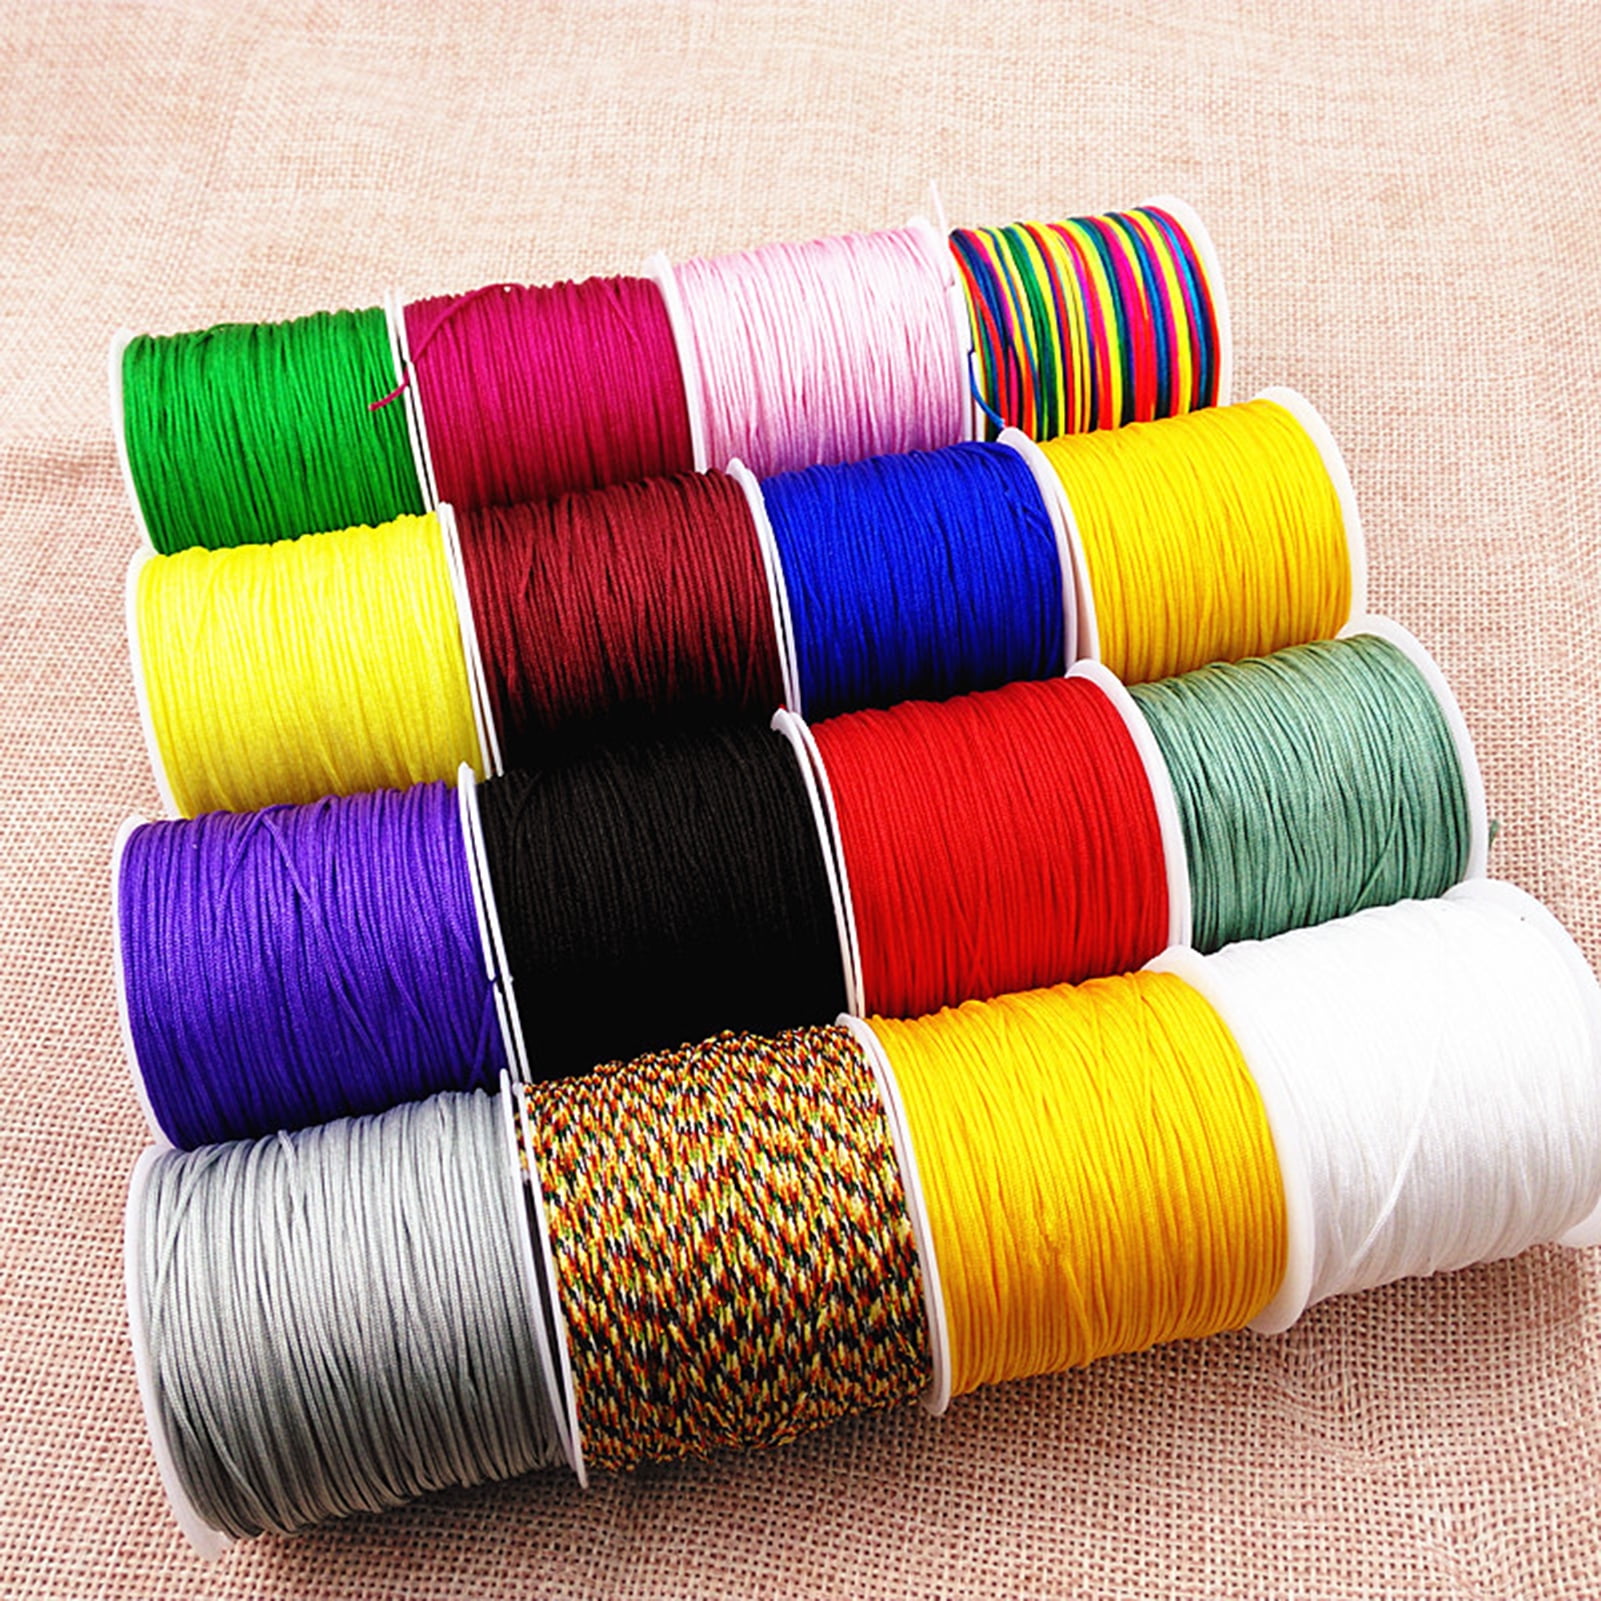 Hesroicy 1 Roll Nylon Waxed Craft Cord Breathable Clear Texture Dream  Catchers Waxed Thread Cord for Sewing 